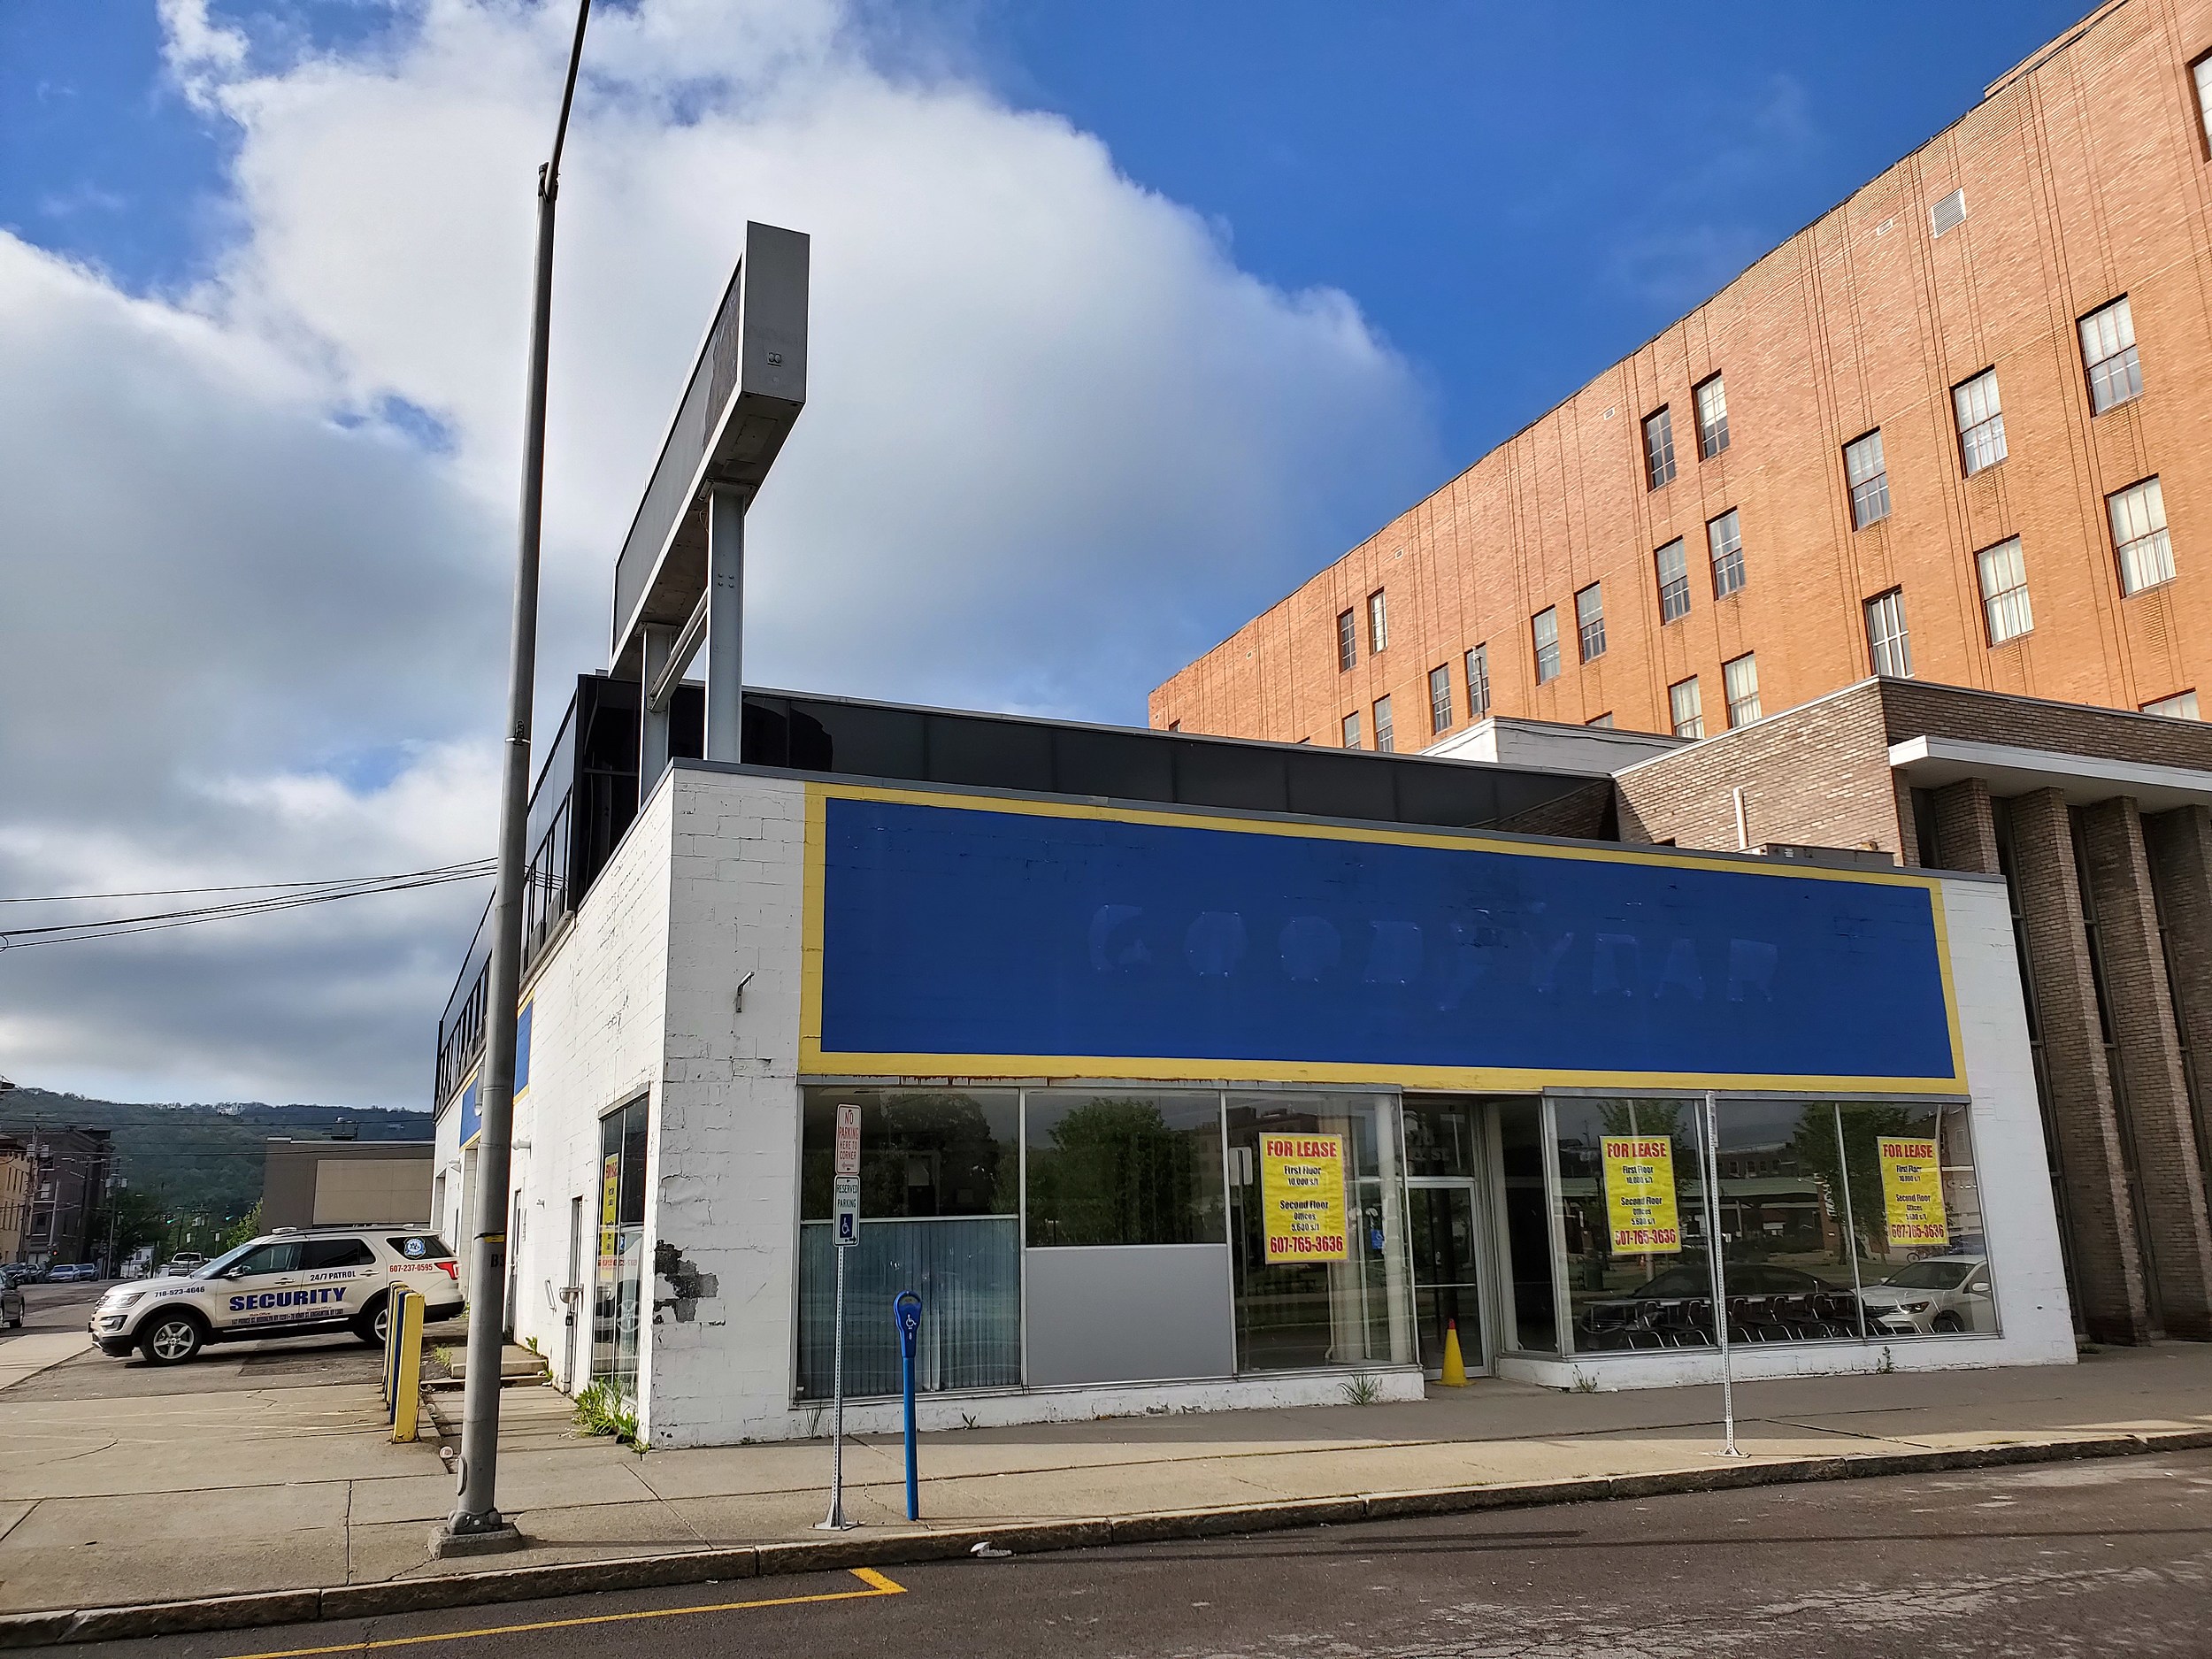 Apartments Planned At Former Binghamton Tire Store